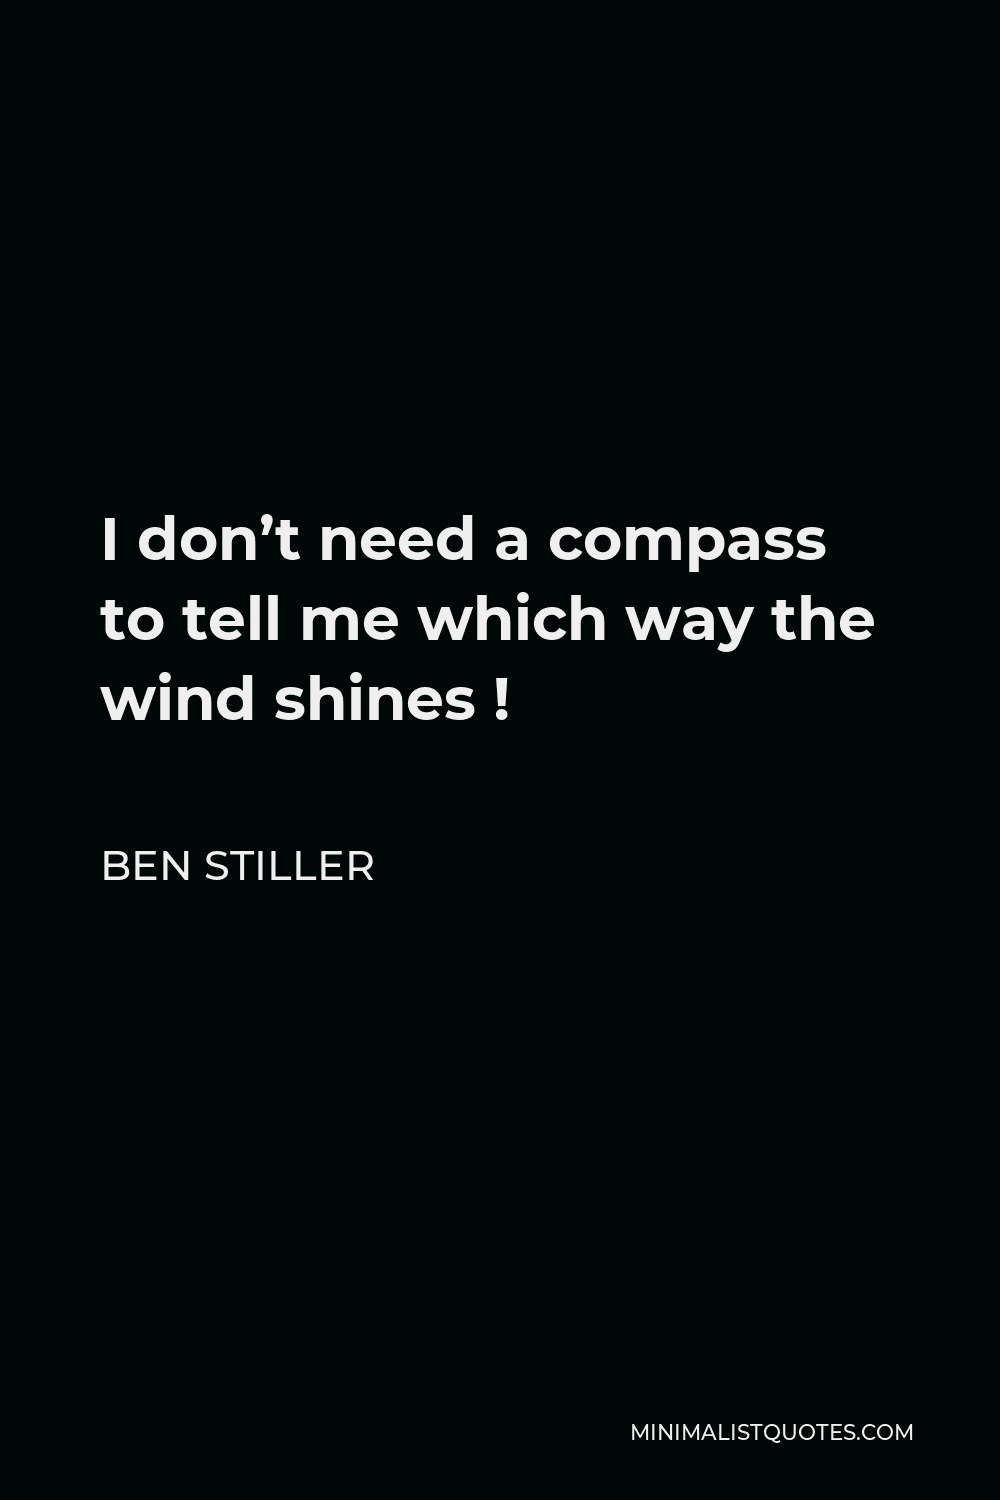 Ben Stiller Quote - I don’t need a compass to tell me which way the wind shines !